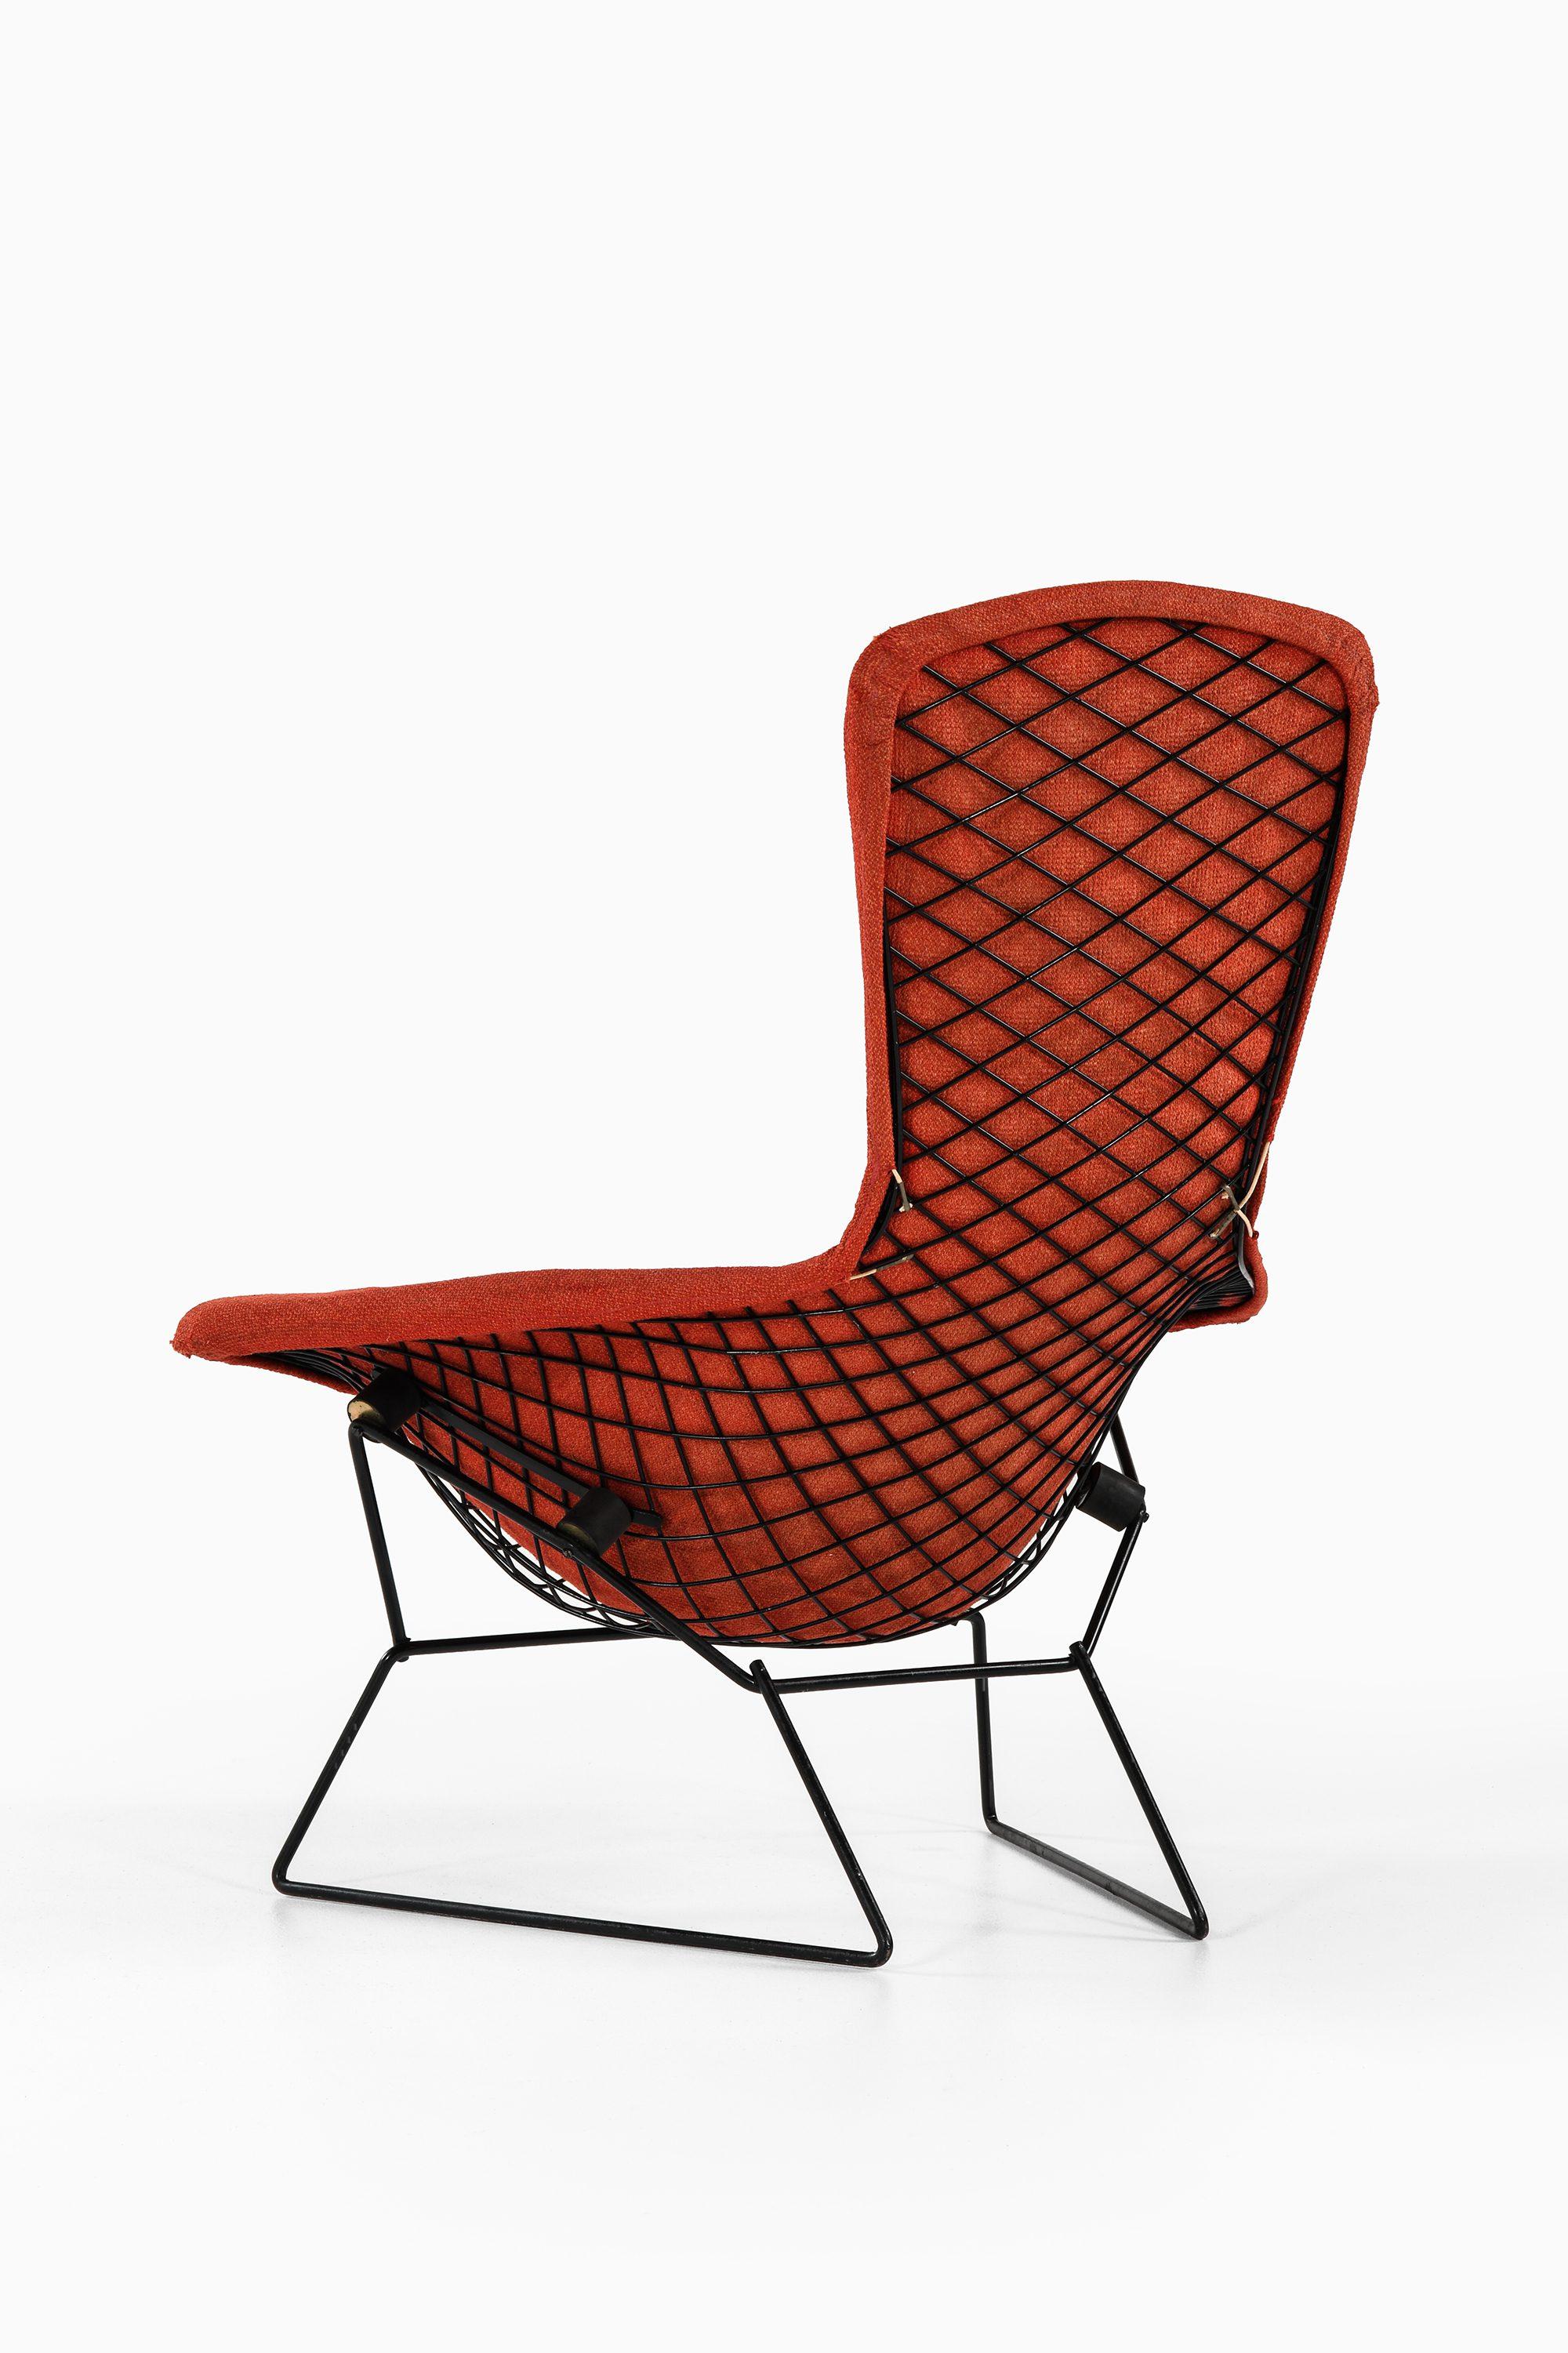 Easy Bird Chair in Black Lacquered Metal and Red Fabric by Harry Bertoia, 1950s In Good Condition For Sale In Limhamn, Skåne län